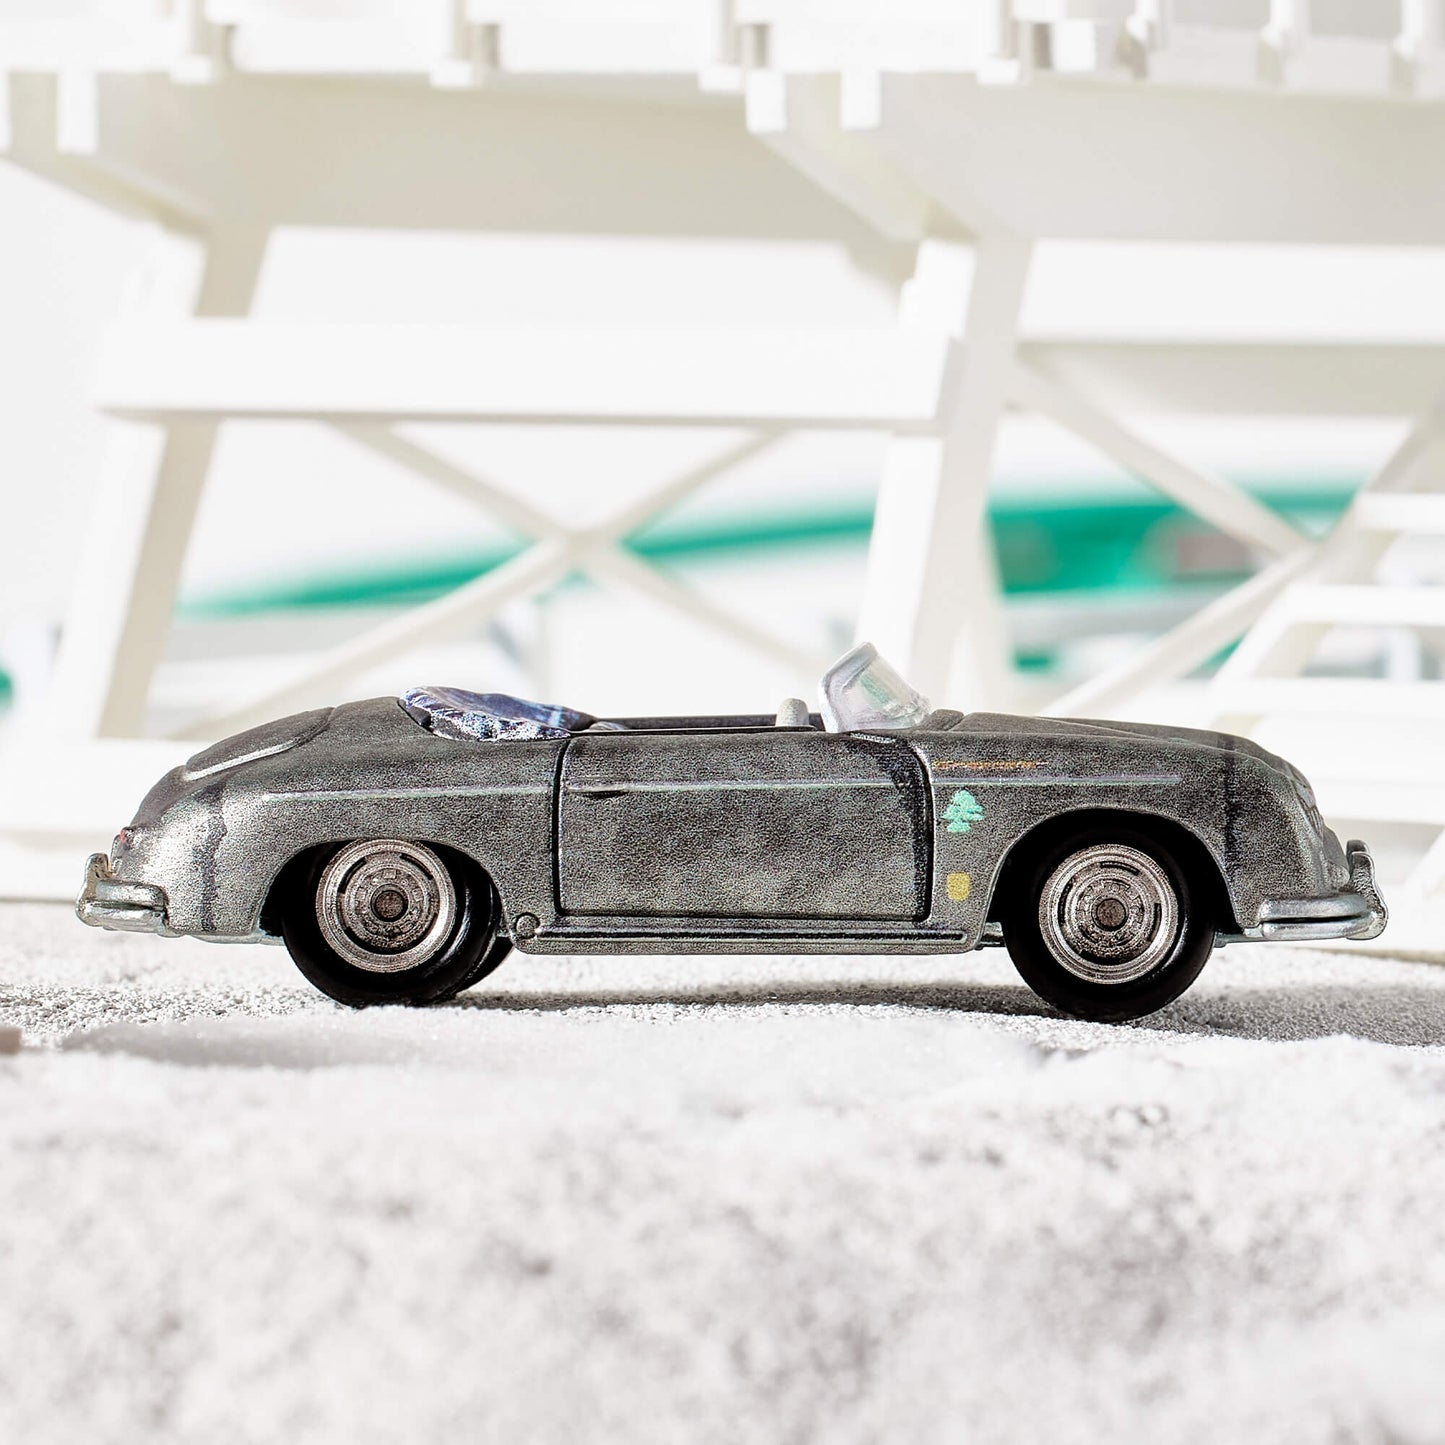 Daniel Arsham x Hot Wheels Porsche 356 “Bonsai” Speedster, 2023 Features: Sculpted crystallized erosions Body Color: Weathering effect to match ZAMAC color Body Type: ZAMAC Chassis: ZAMAC Wheels: Real Riders deep dish wheels with wash/wipe weathering effect Window Color: Clear Interior Color: Plastic replica of 1:1 version’s indigo-dyed Japanese textiles Scale 1:64 Includes sealing label and Certificate of Authenticity Packaged in a collector display case with simulated concrete base.